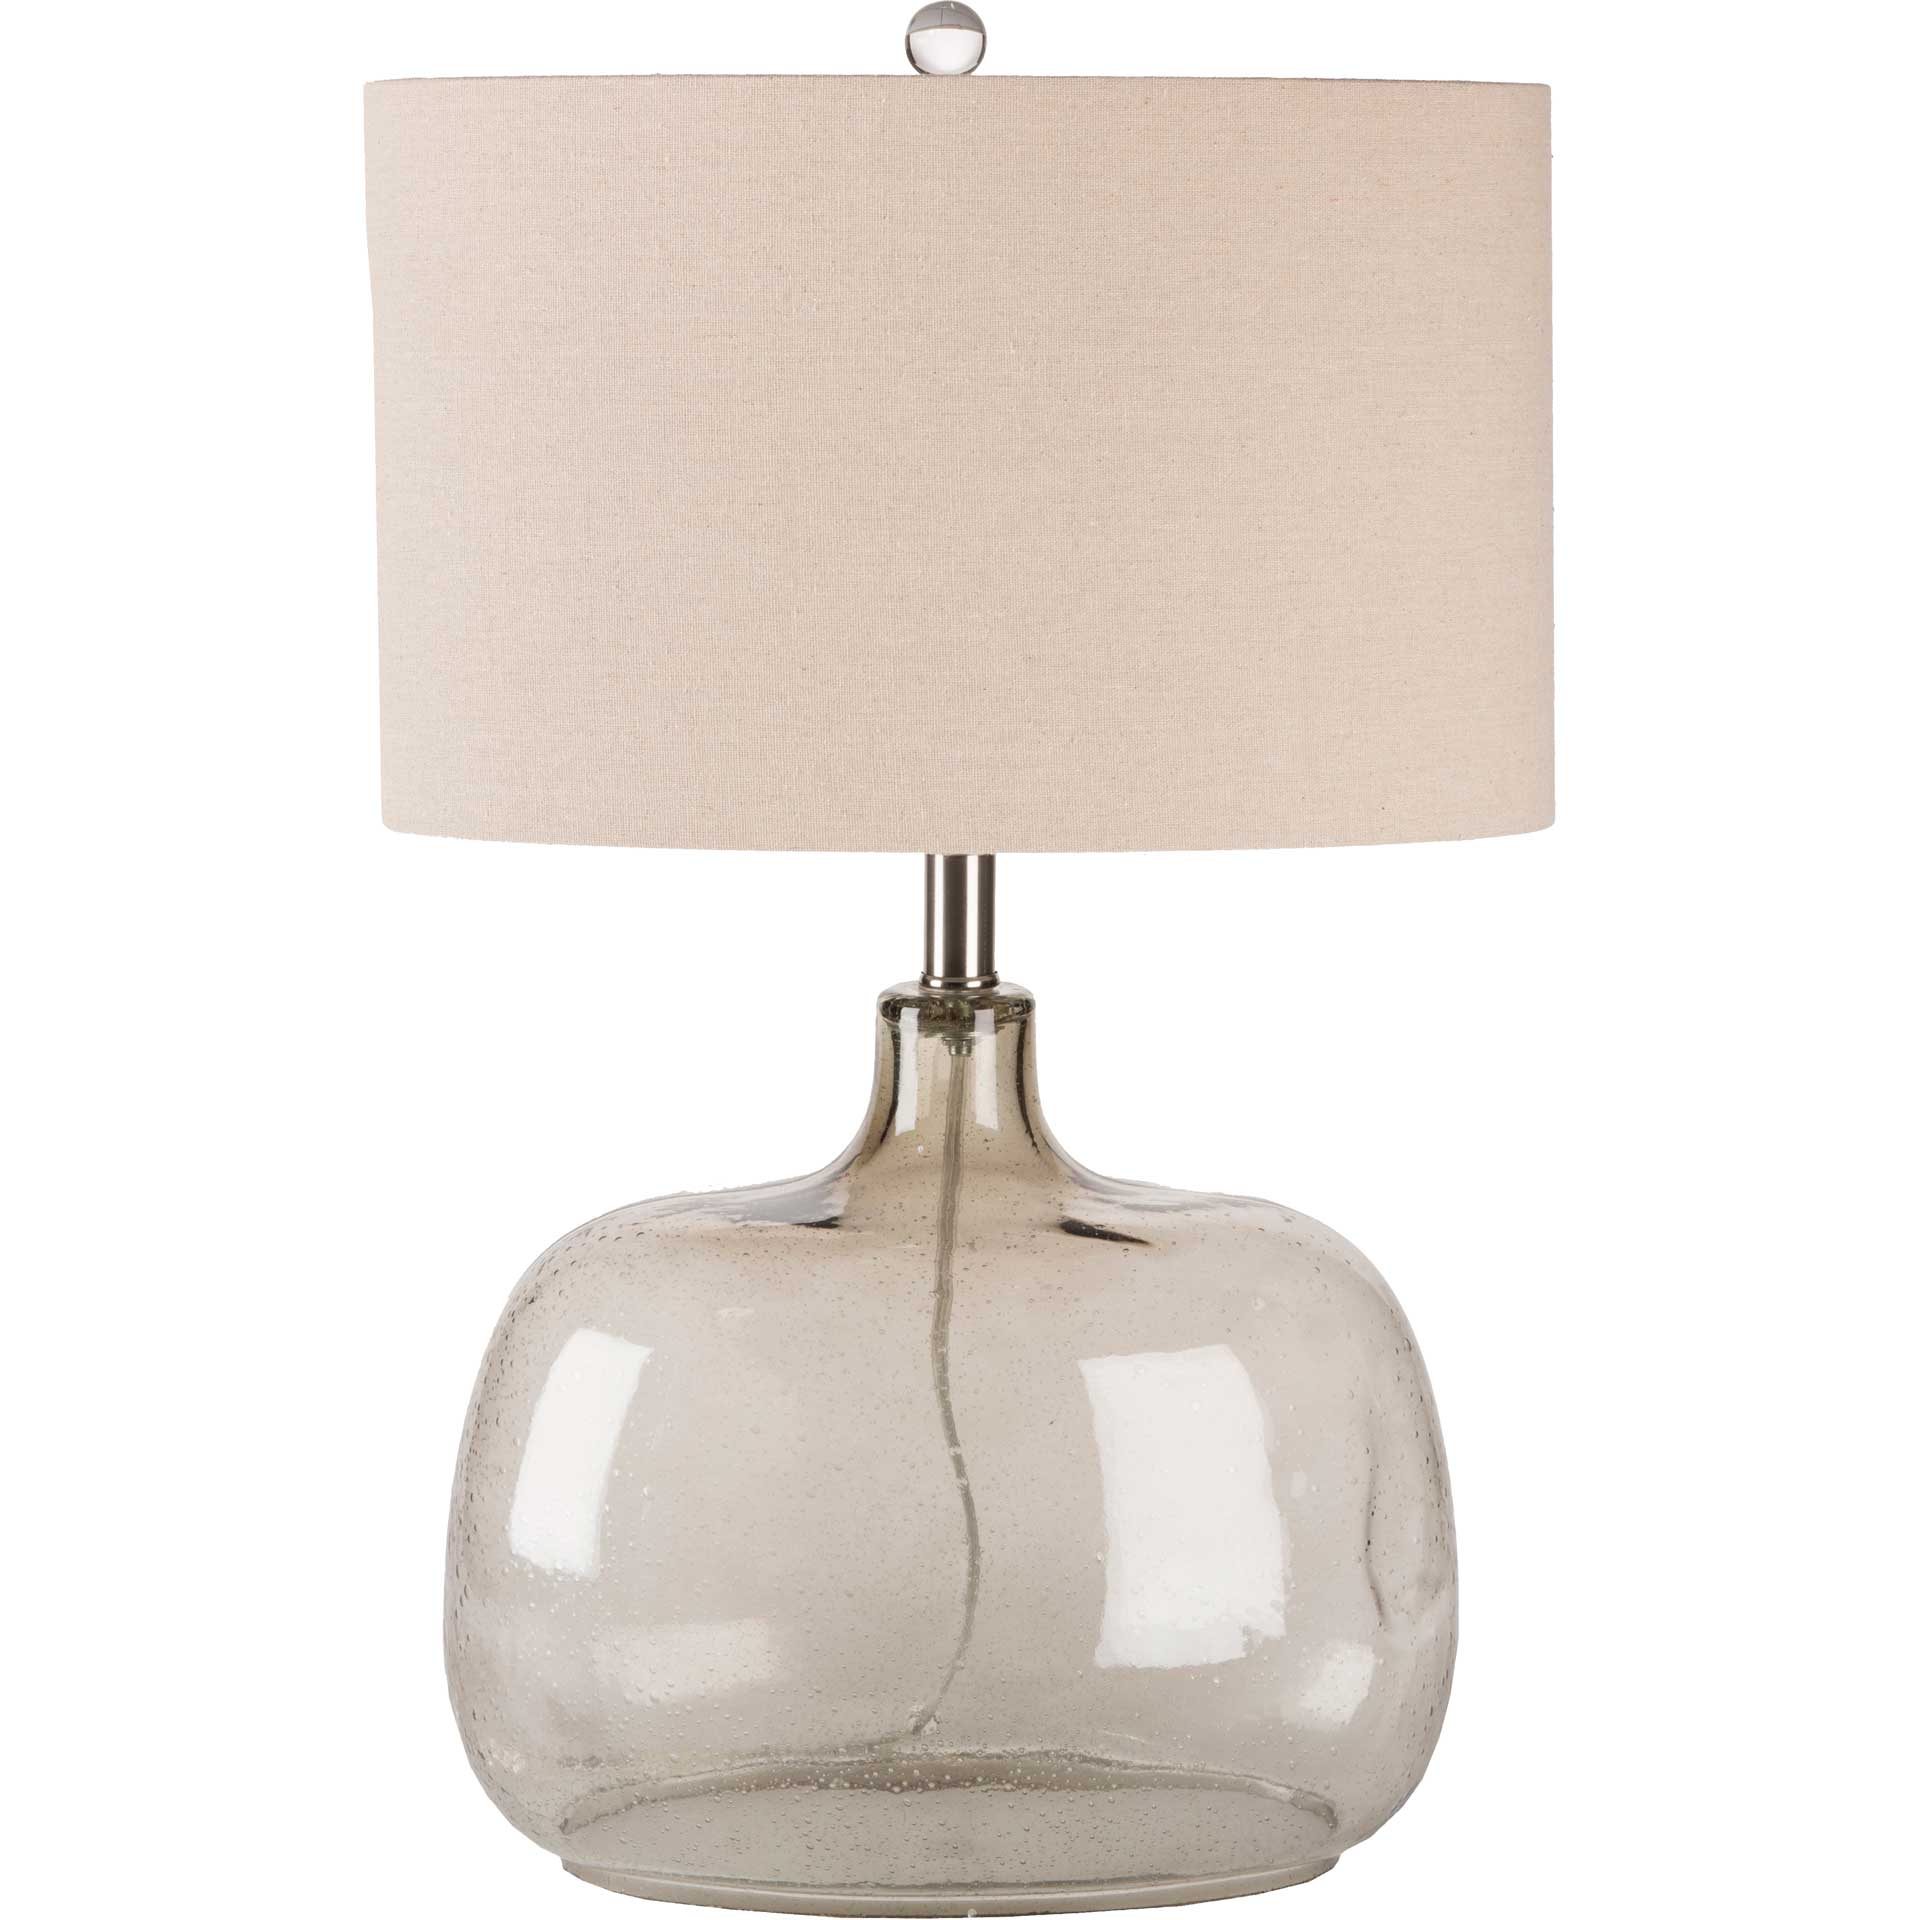 Bria Table Lamp Ivory/Taupe/Light Gray